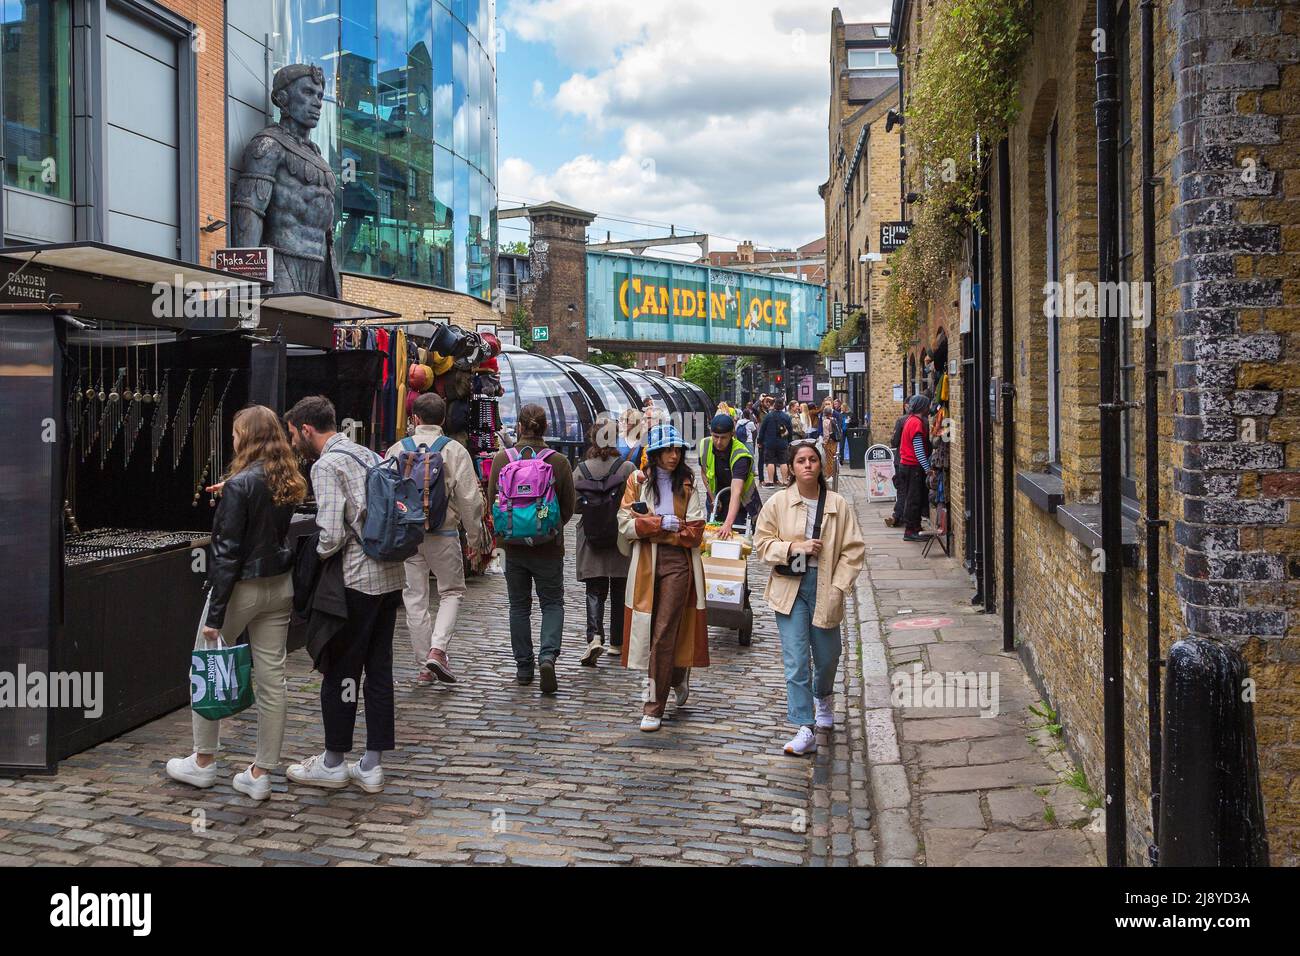 A busy street filled with shoppers and tourists, with the iconic Camden Lock railway bridge in the background. Stock Photo